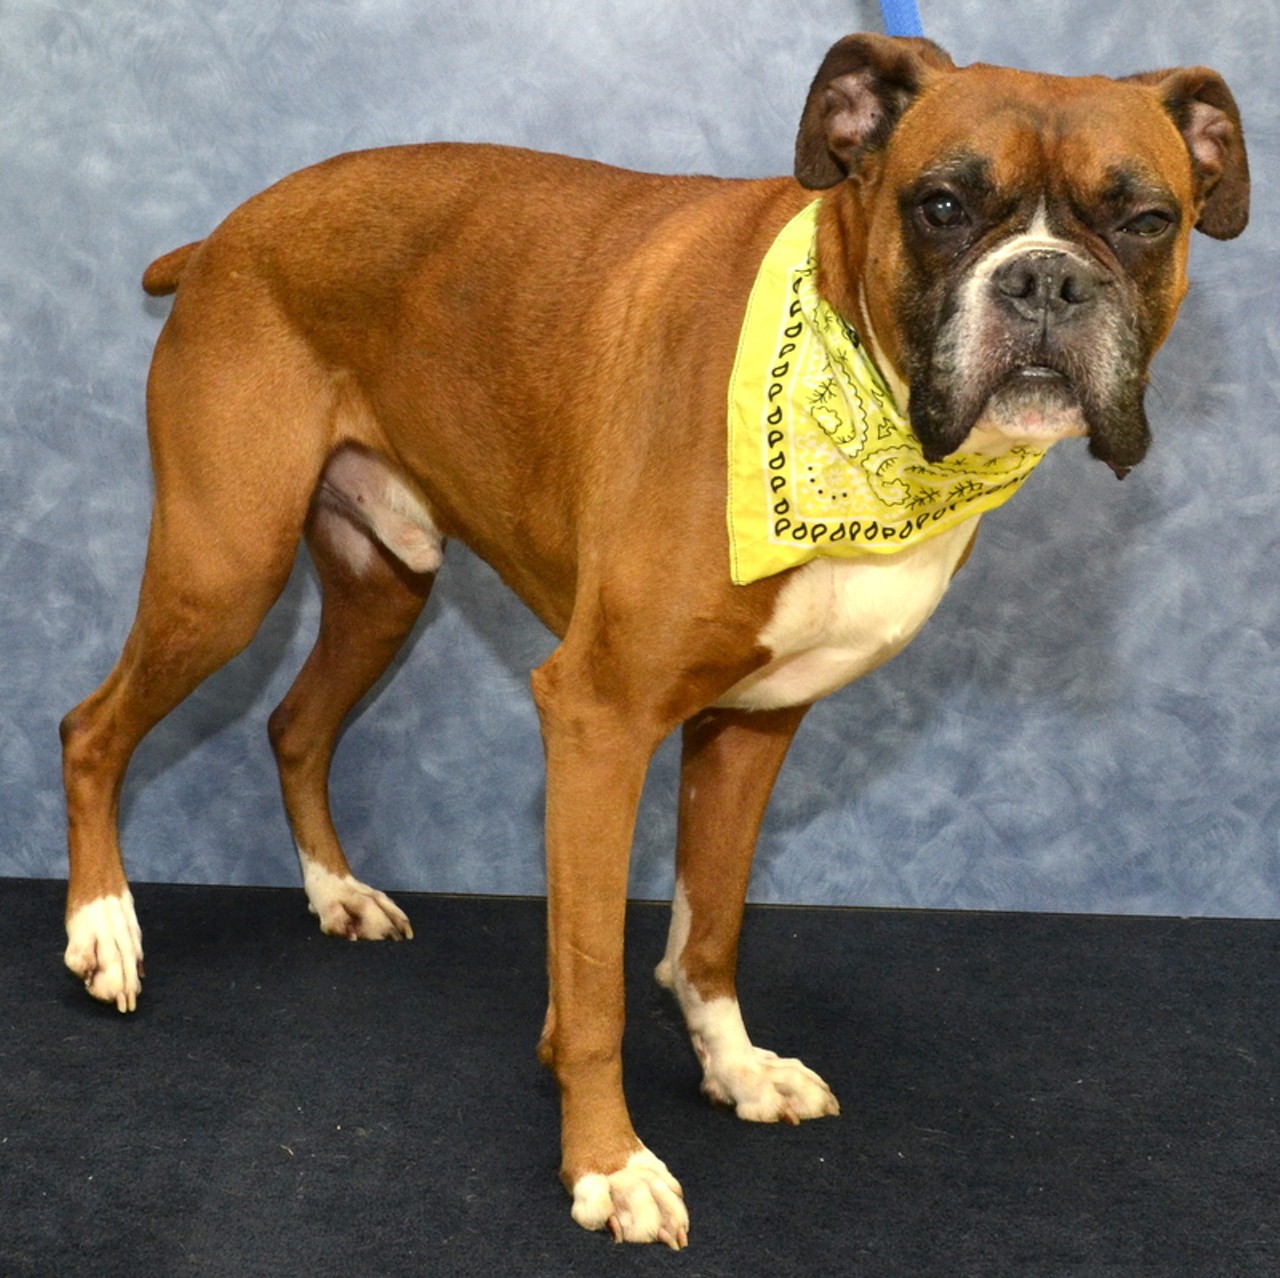 NAME: Apollo
GENDER: Male
BREED: Boxer
AGE: 10 years
WEIGHT: 67 pounds
SPECIAL CONSIDERATIONS: May prefer to be your only dog
REASON I CAME TO MHS: Owner surrender
LOCATION: Berman Center for Animal Care in Westland
ID NUMBER: 864978